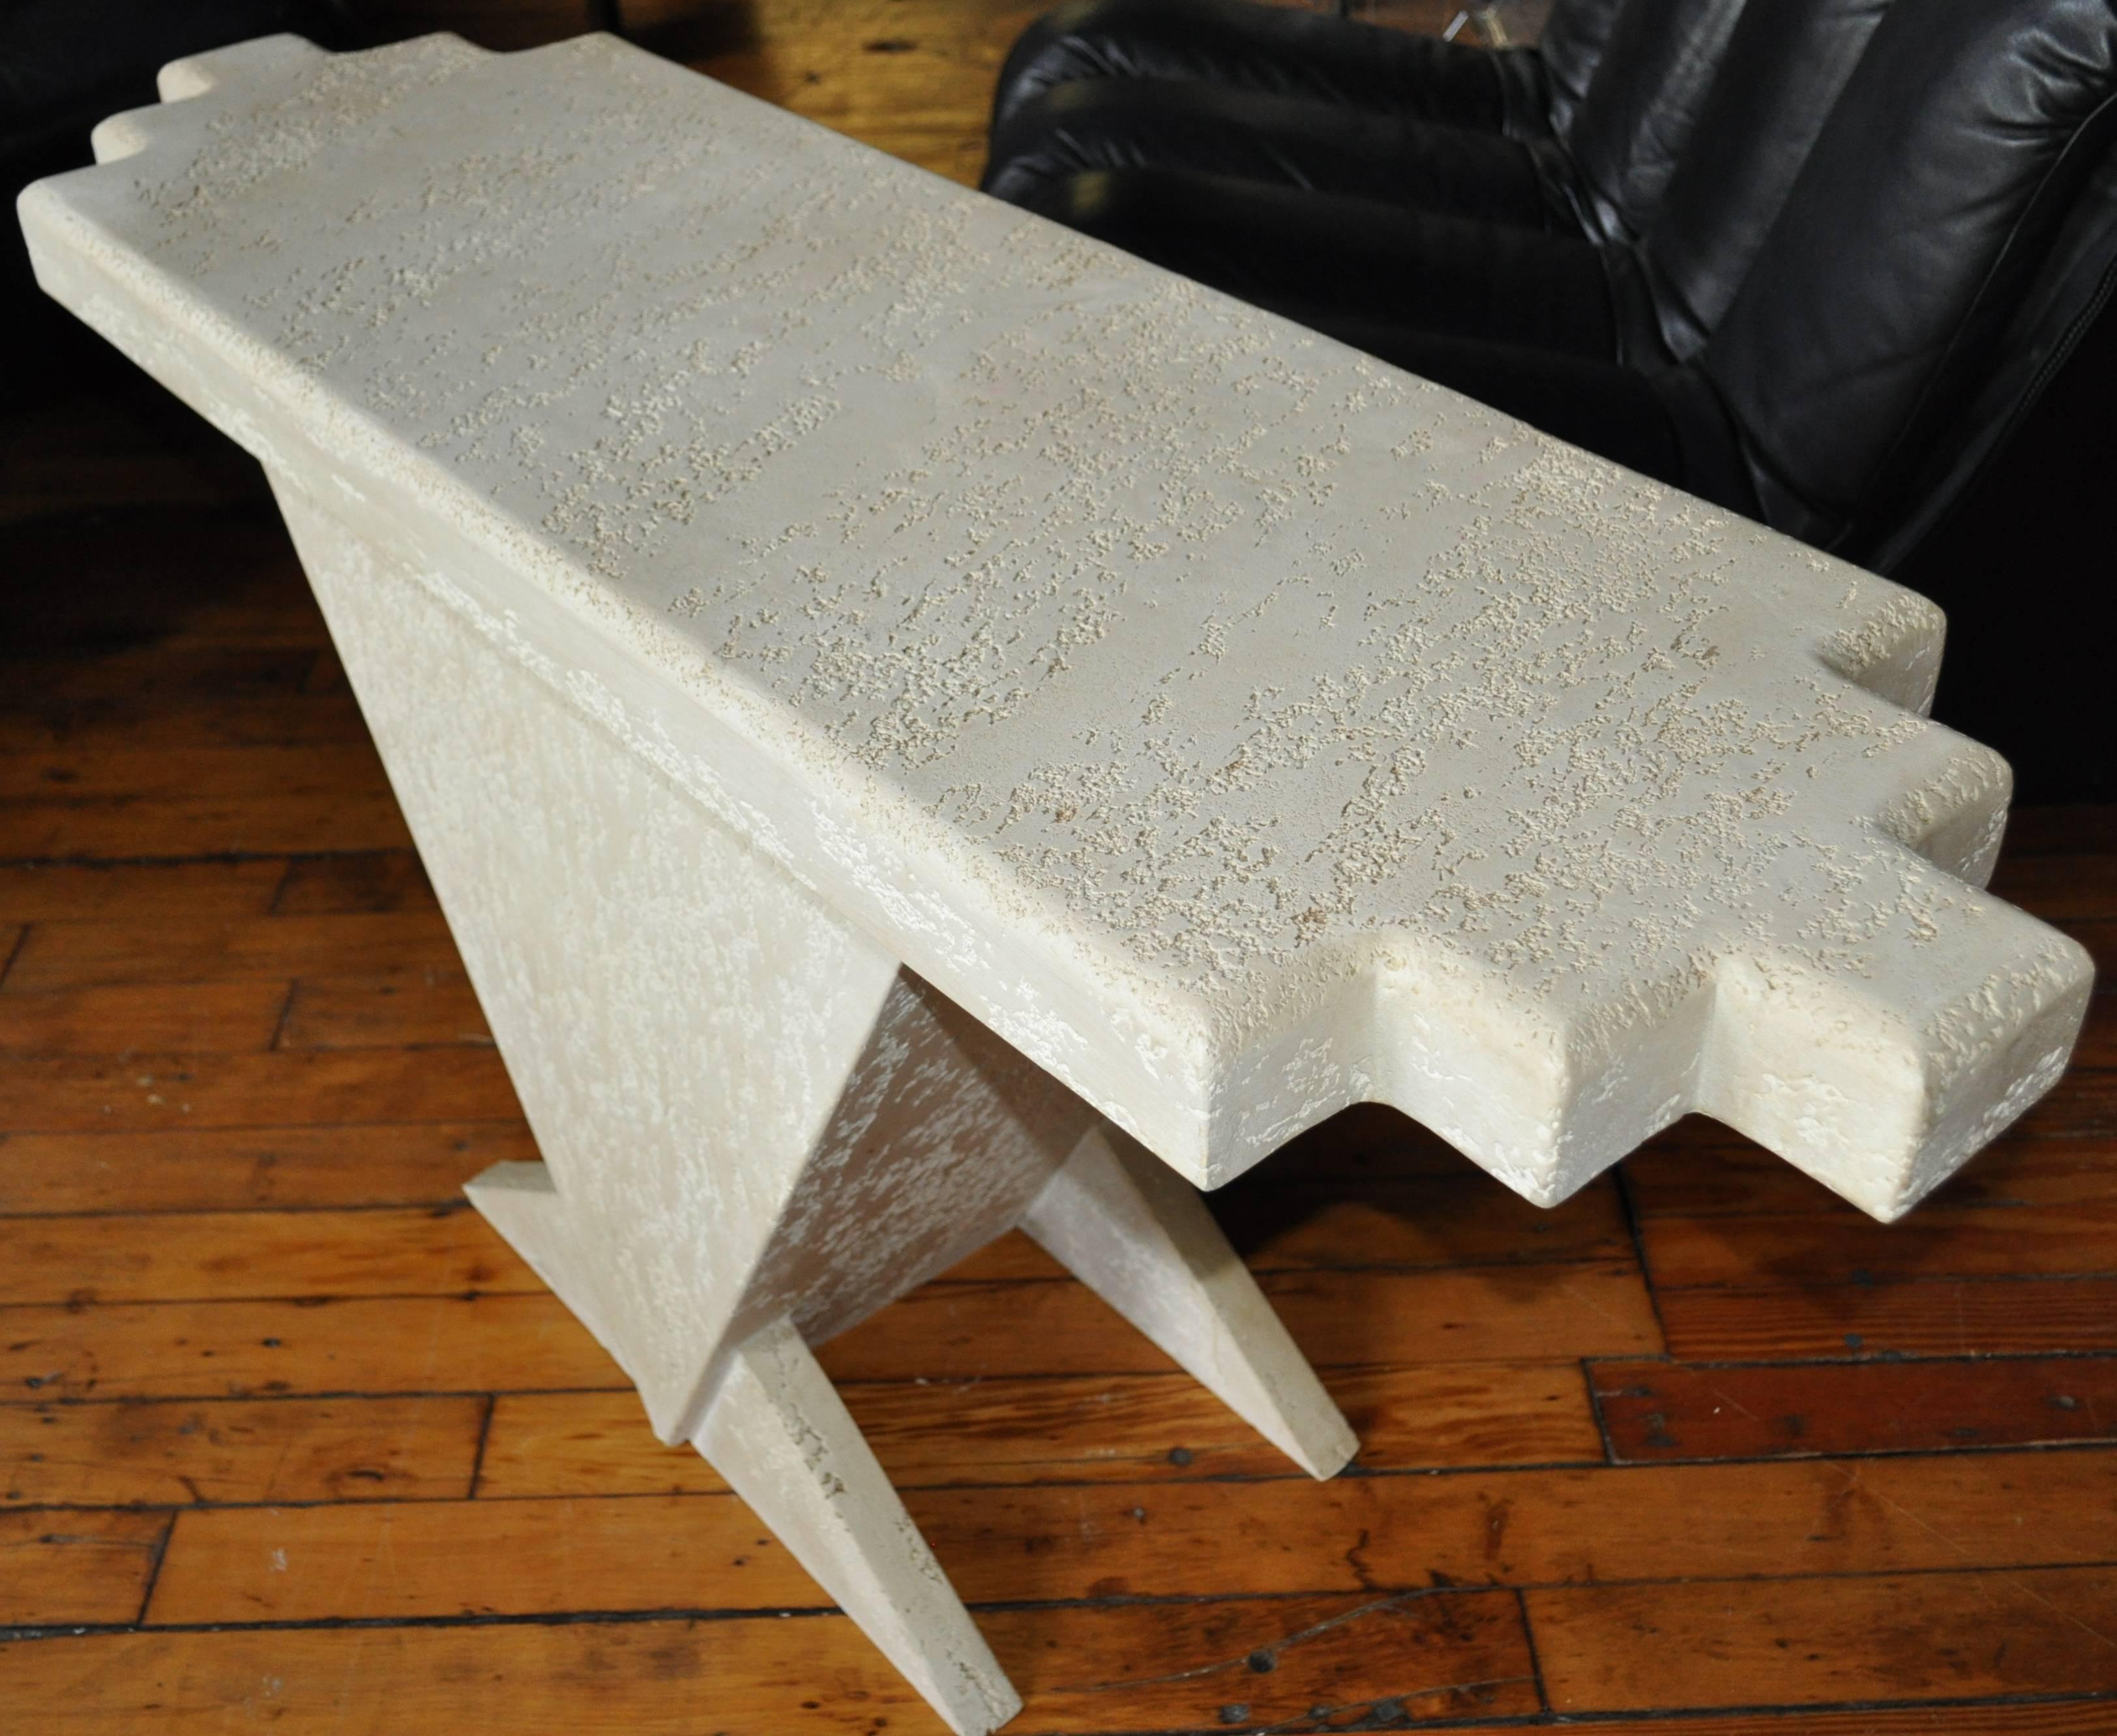 Sculptural entry console table with a triangular form base and a textural cream tone plaster finish.  